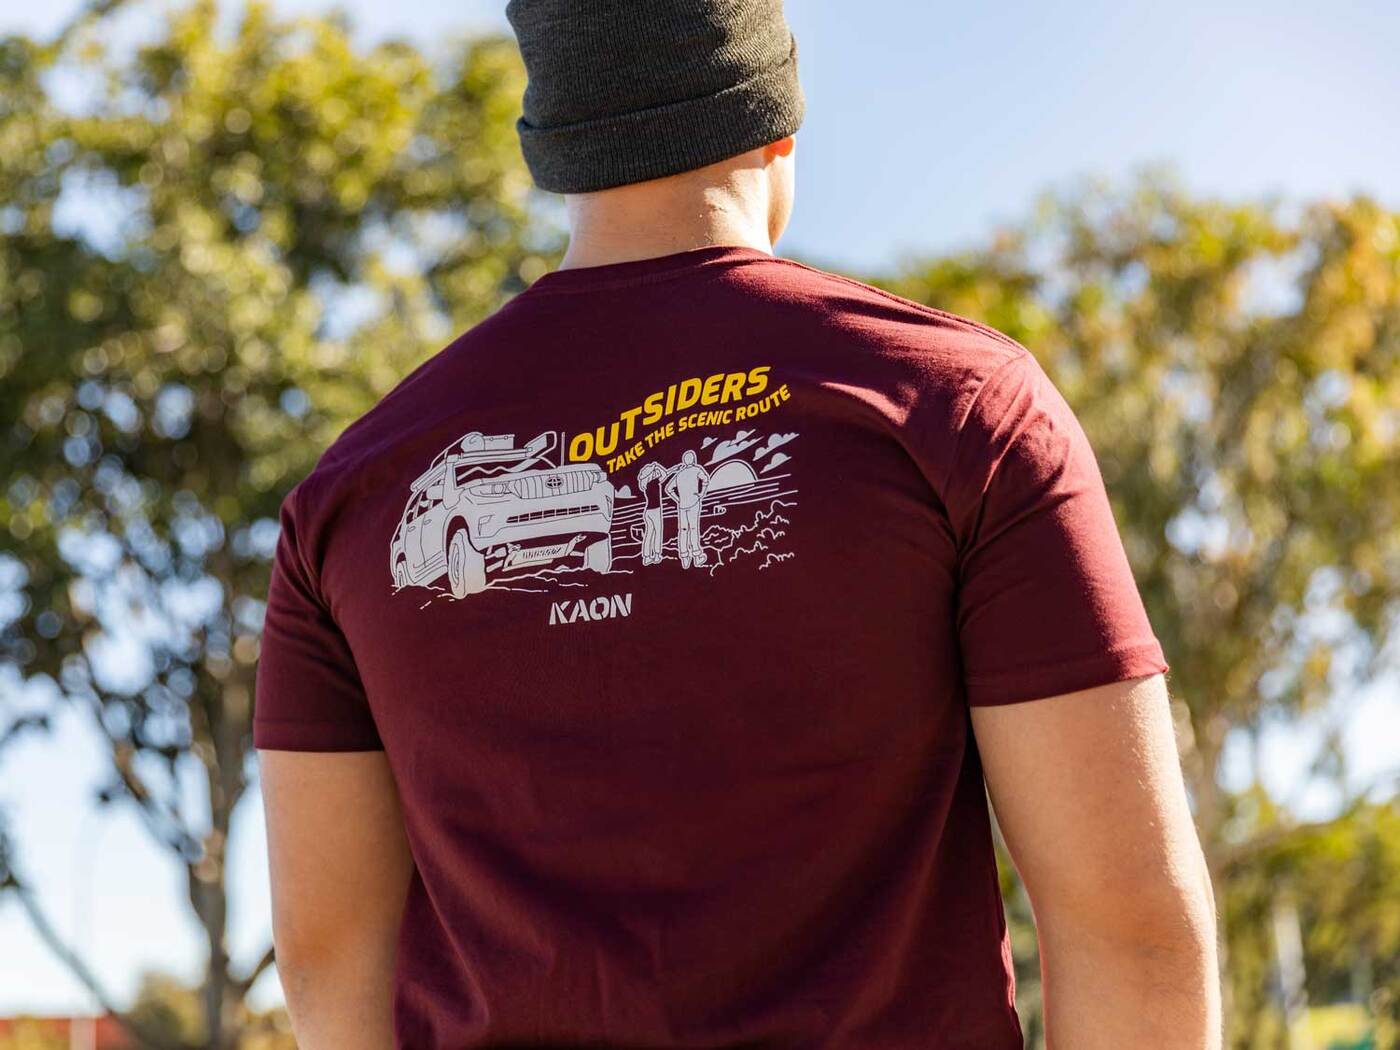 KAON Outsiders Take the Scenic Route Tee